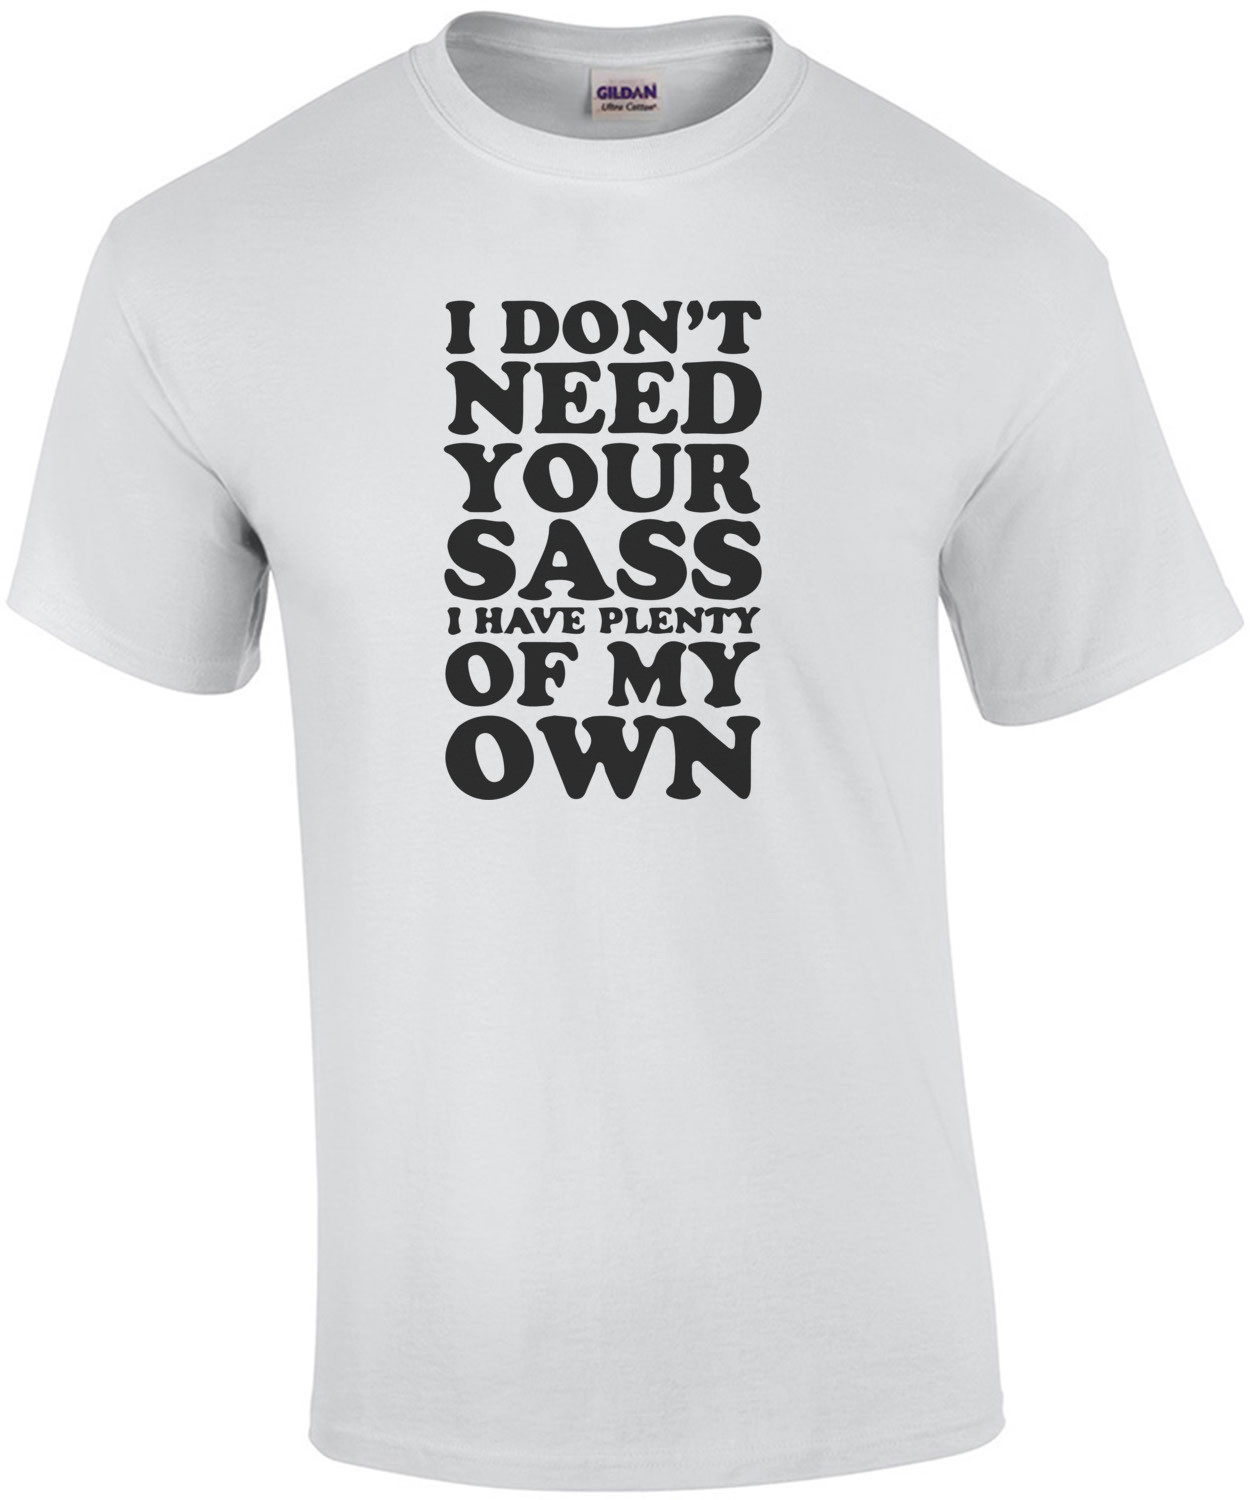 I don't need your sass I have plenty of my own t-shirt